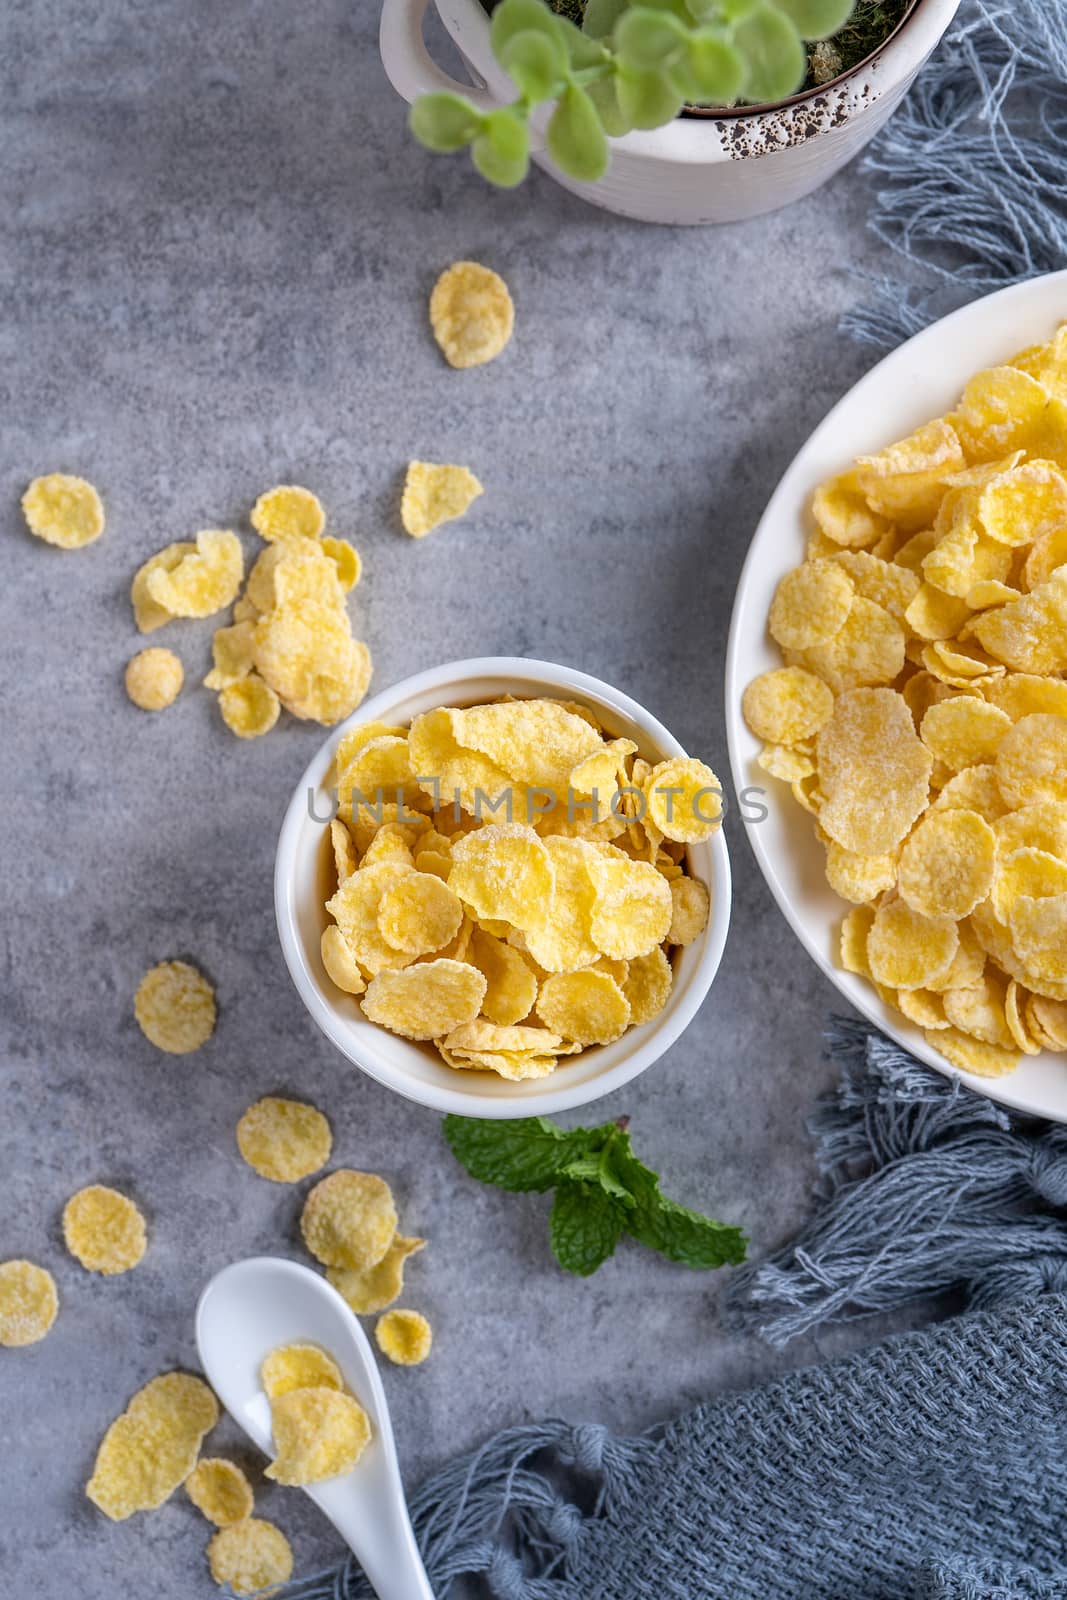 Corn flakes bowl sweets on gray cement background, top view flat lay layout design, fresh and healthy breakfast concept.